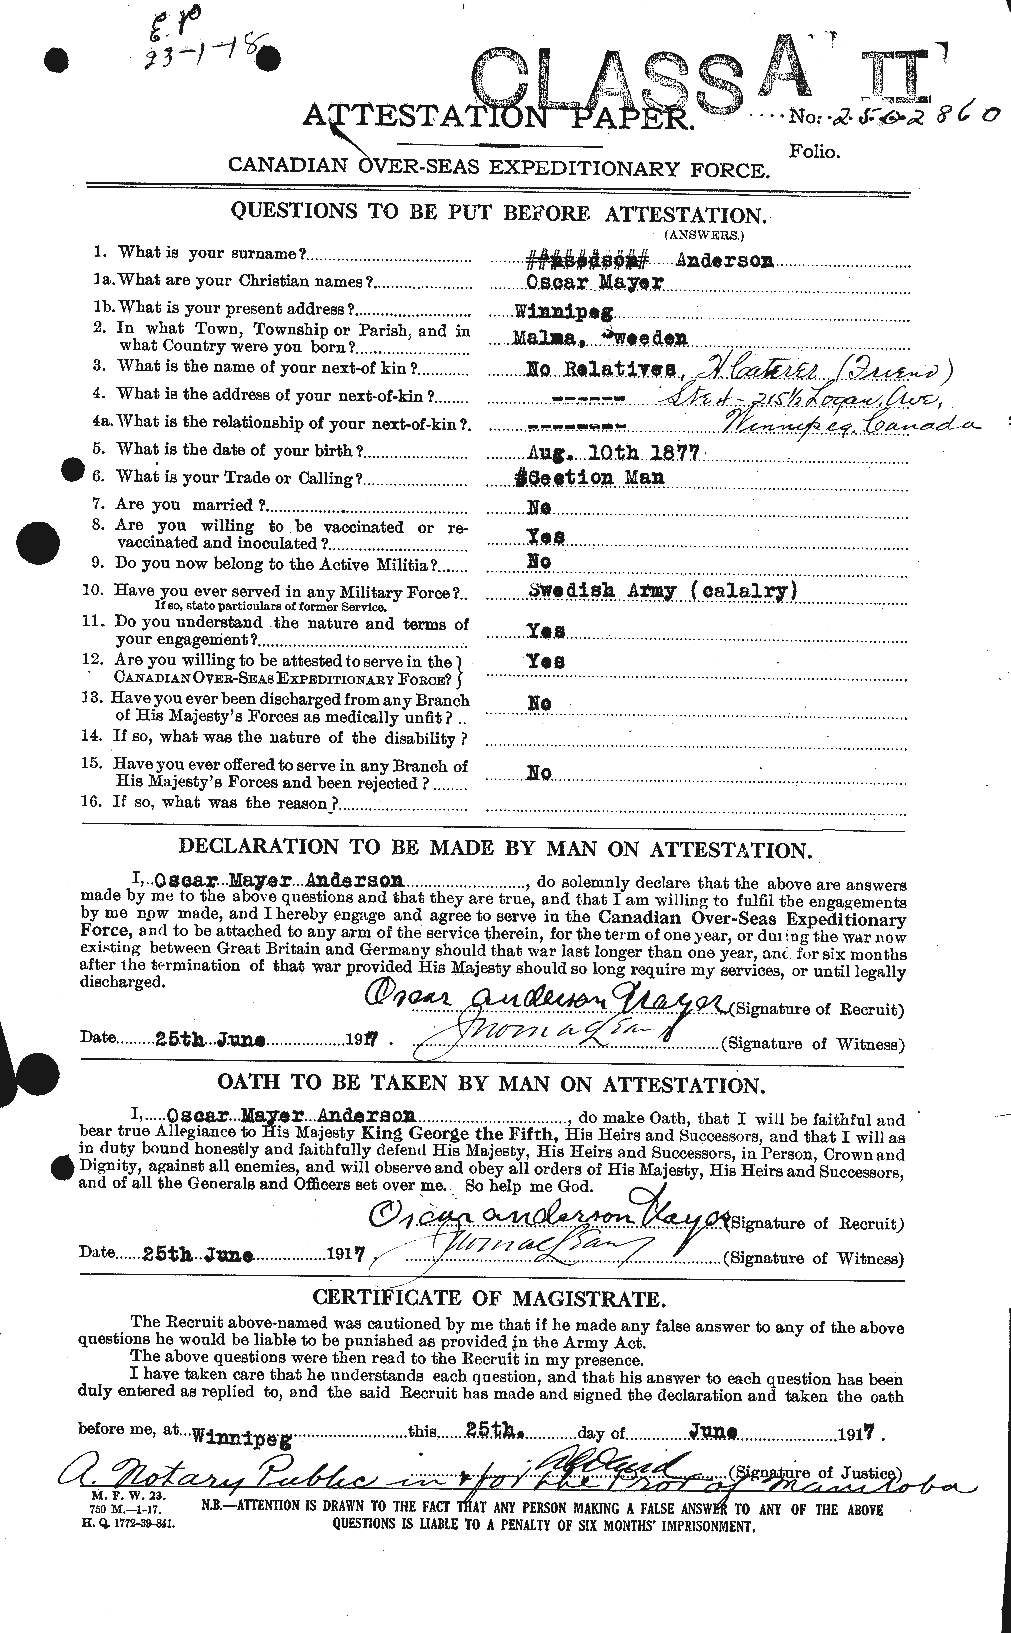 Personnel Records of the First World War - CEF 207375a